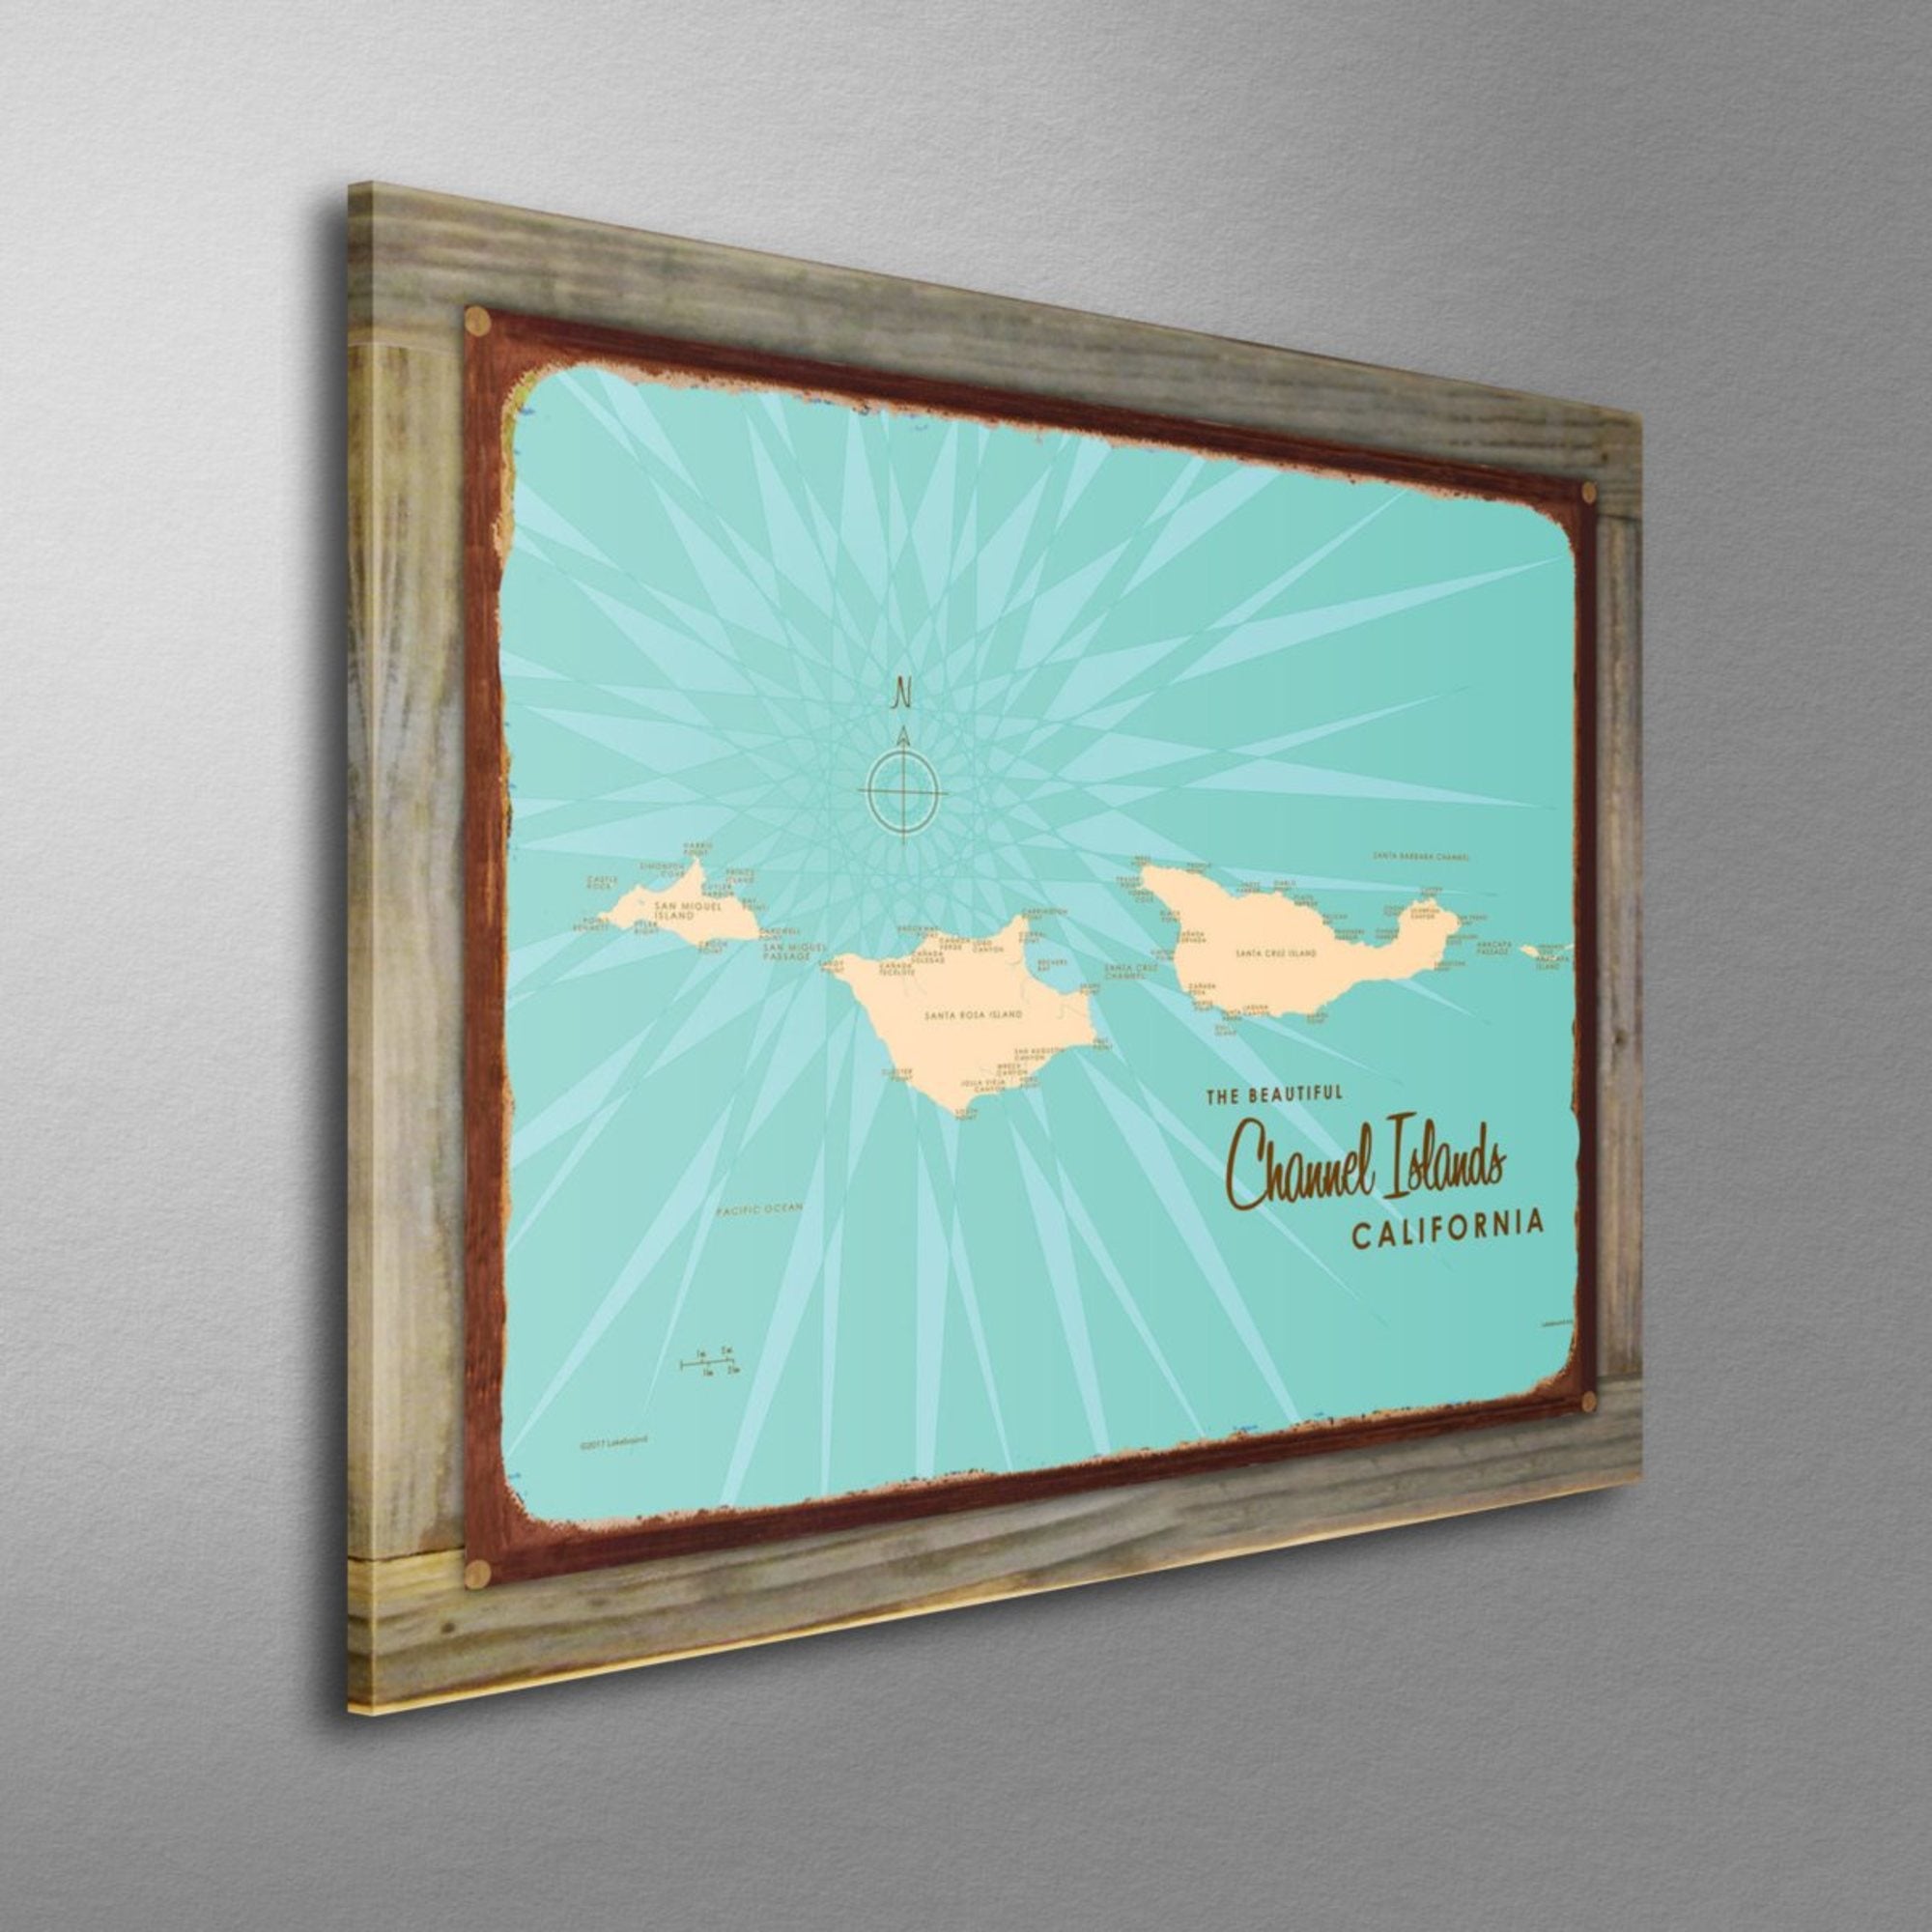 Channel Islands California, Wood-Mounted Rustic Metal Sign Map Art